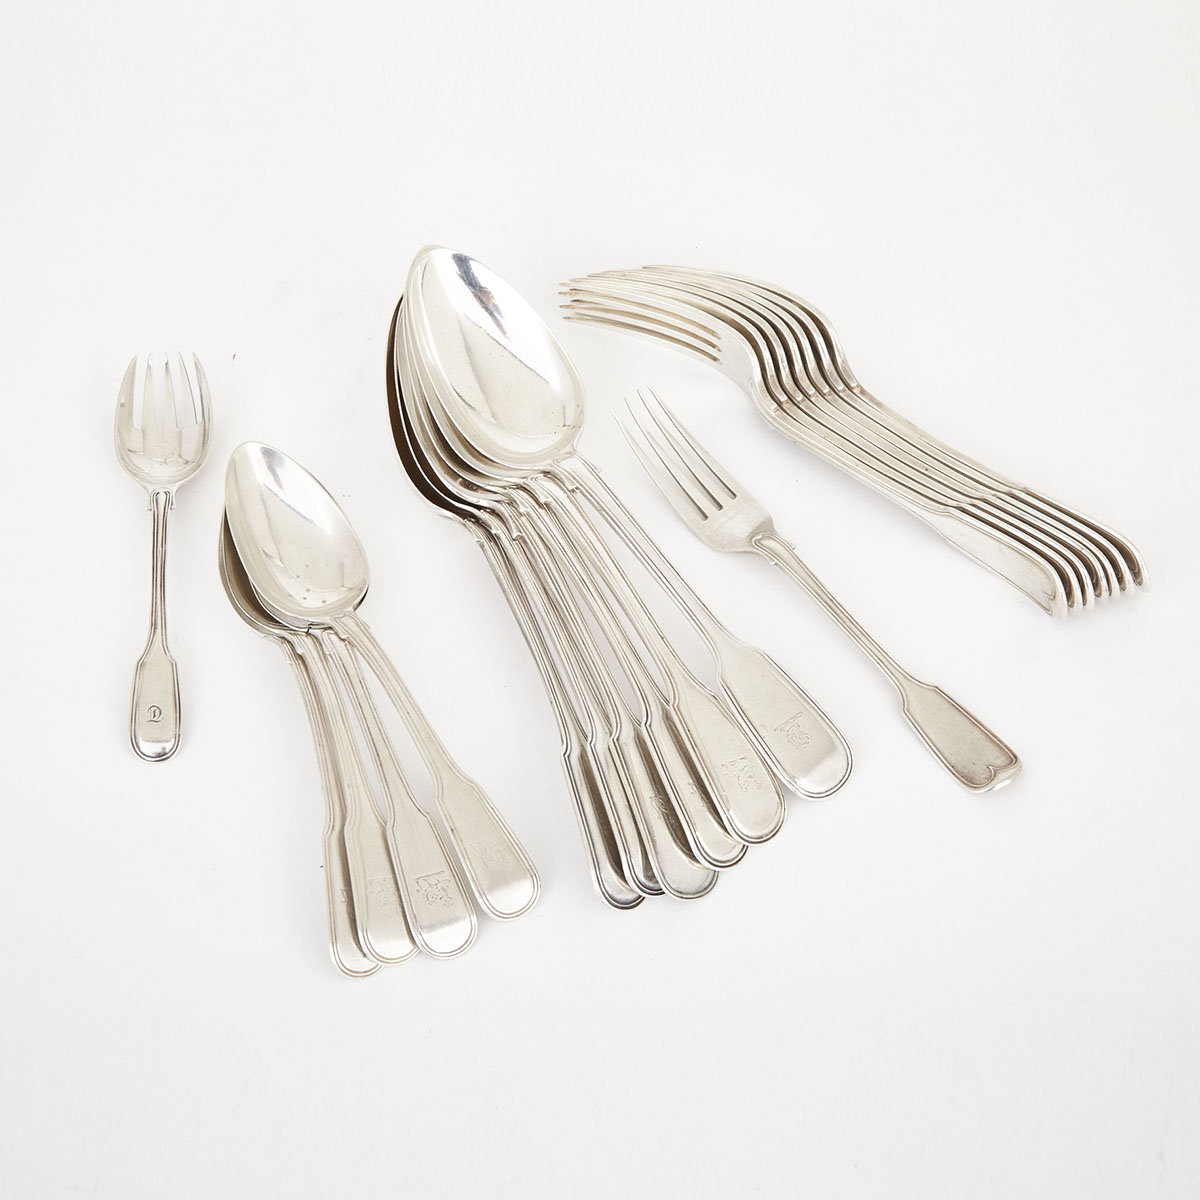 Group of George III and Later Silver Fiddle and Thread Pattern Flatware, London, 1804-1924